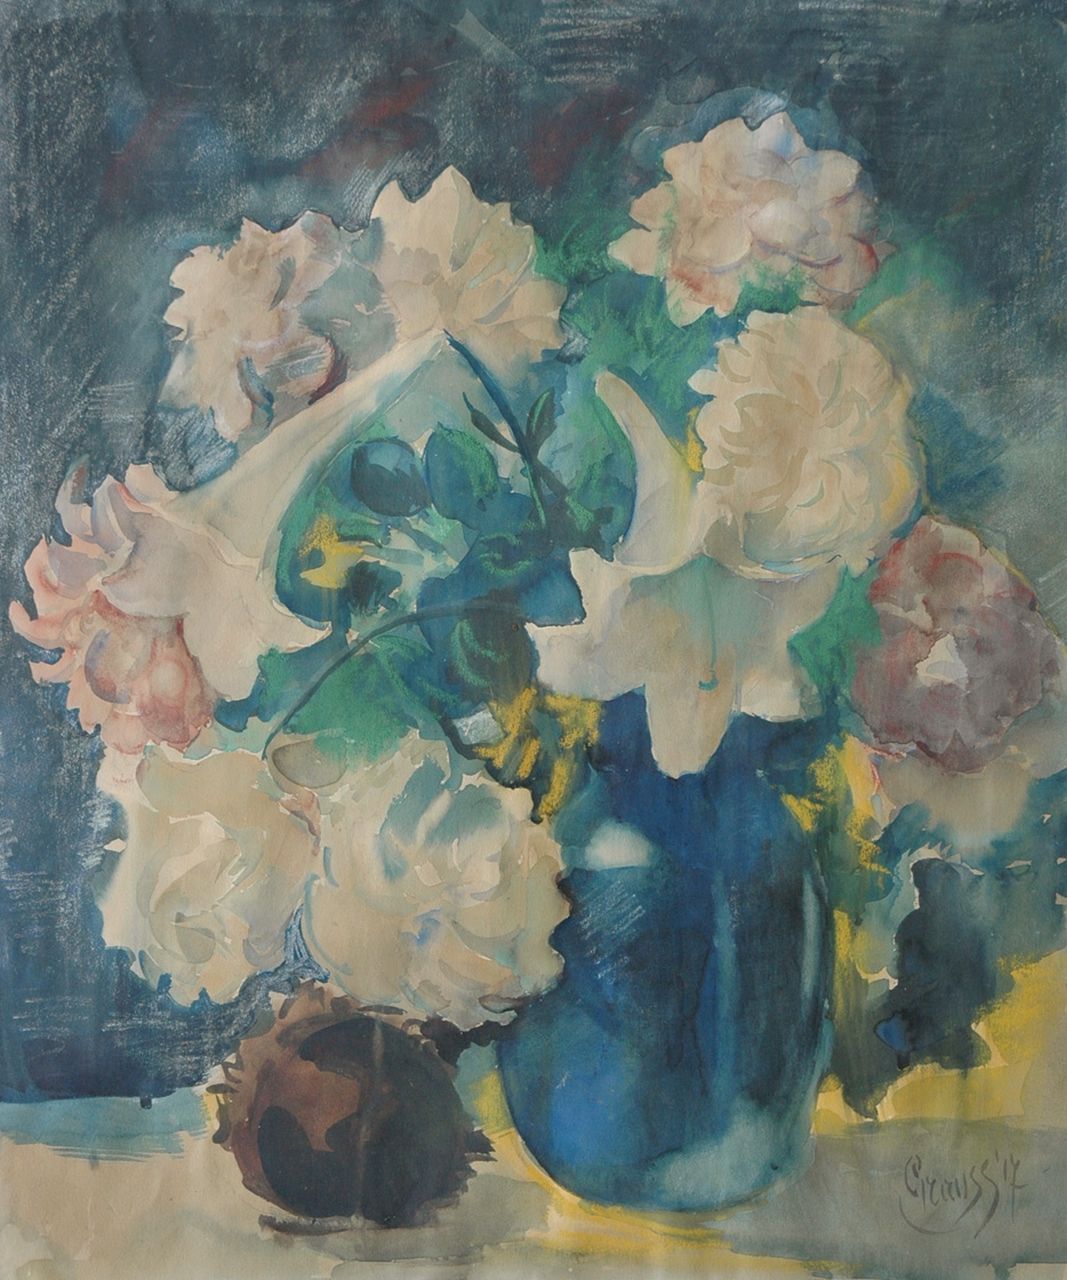 Geert Grauss | Flowers in a blue vase, pastel and watercolour on paper, 67.8 x 56.4 cm, signed l.r. and dated '17